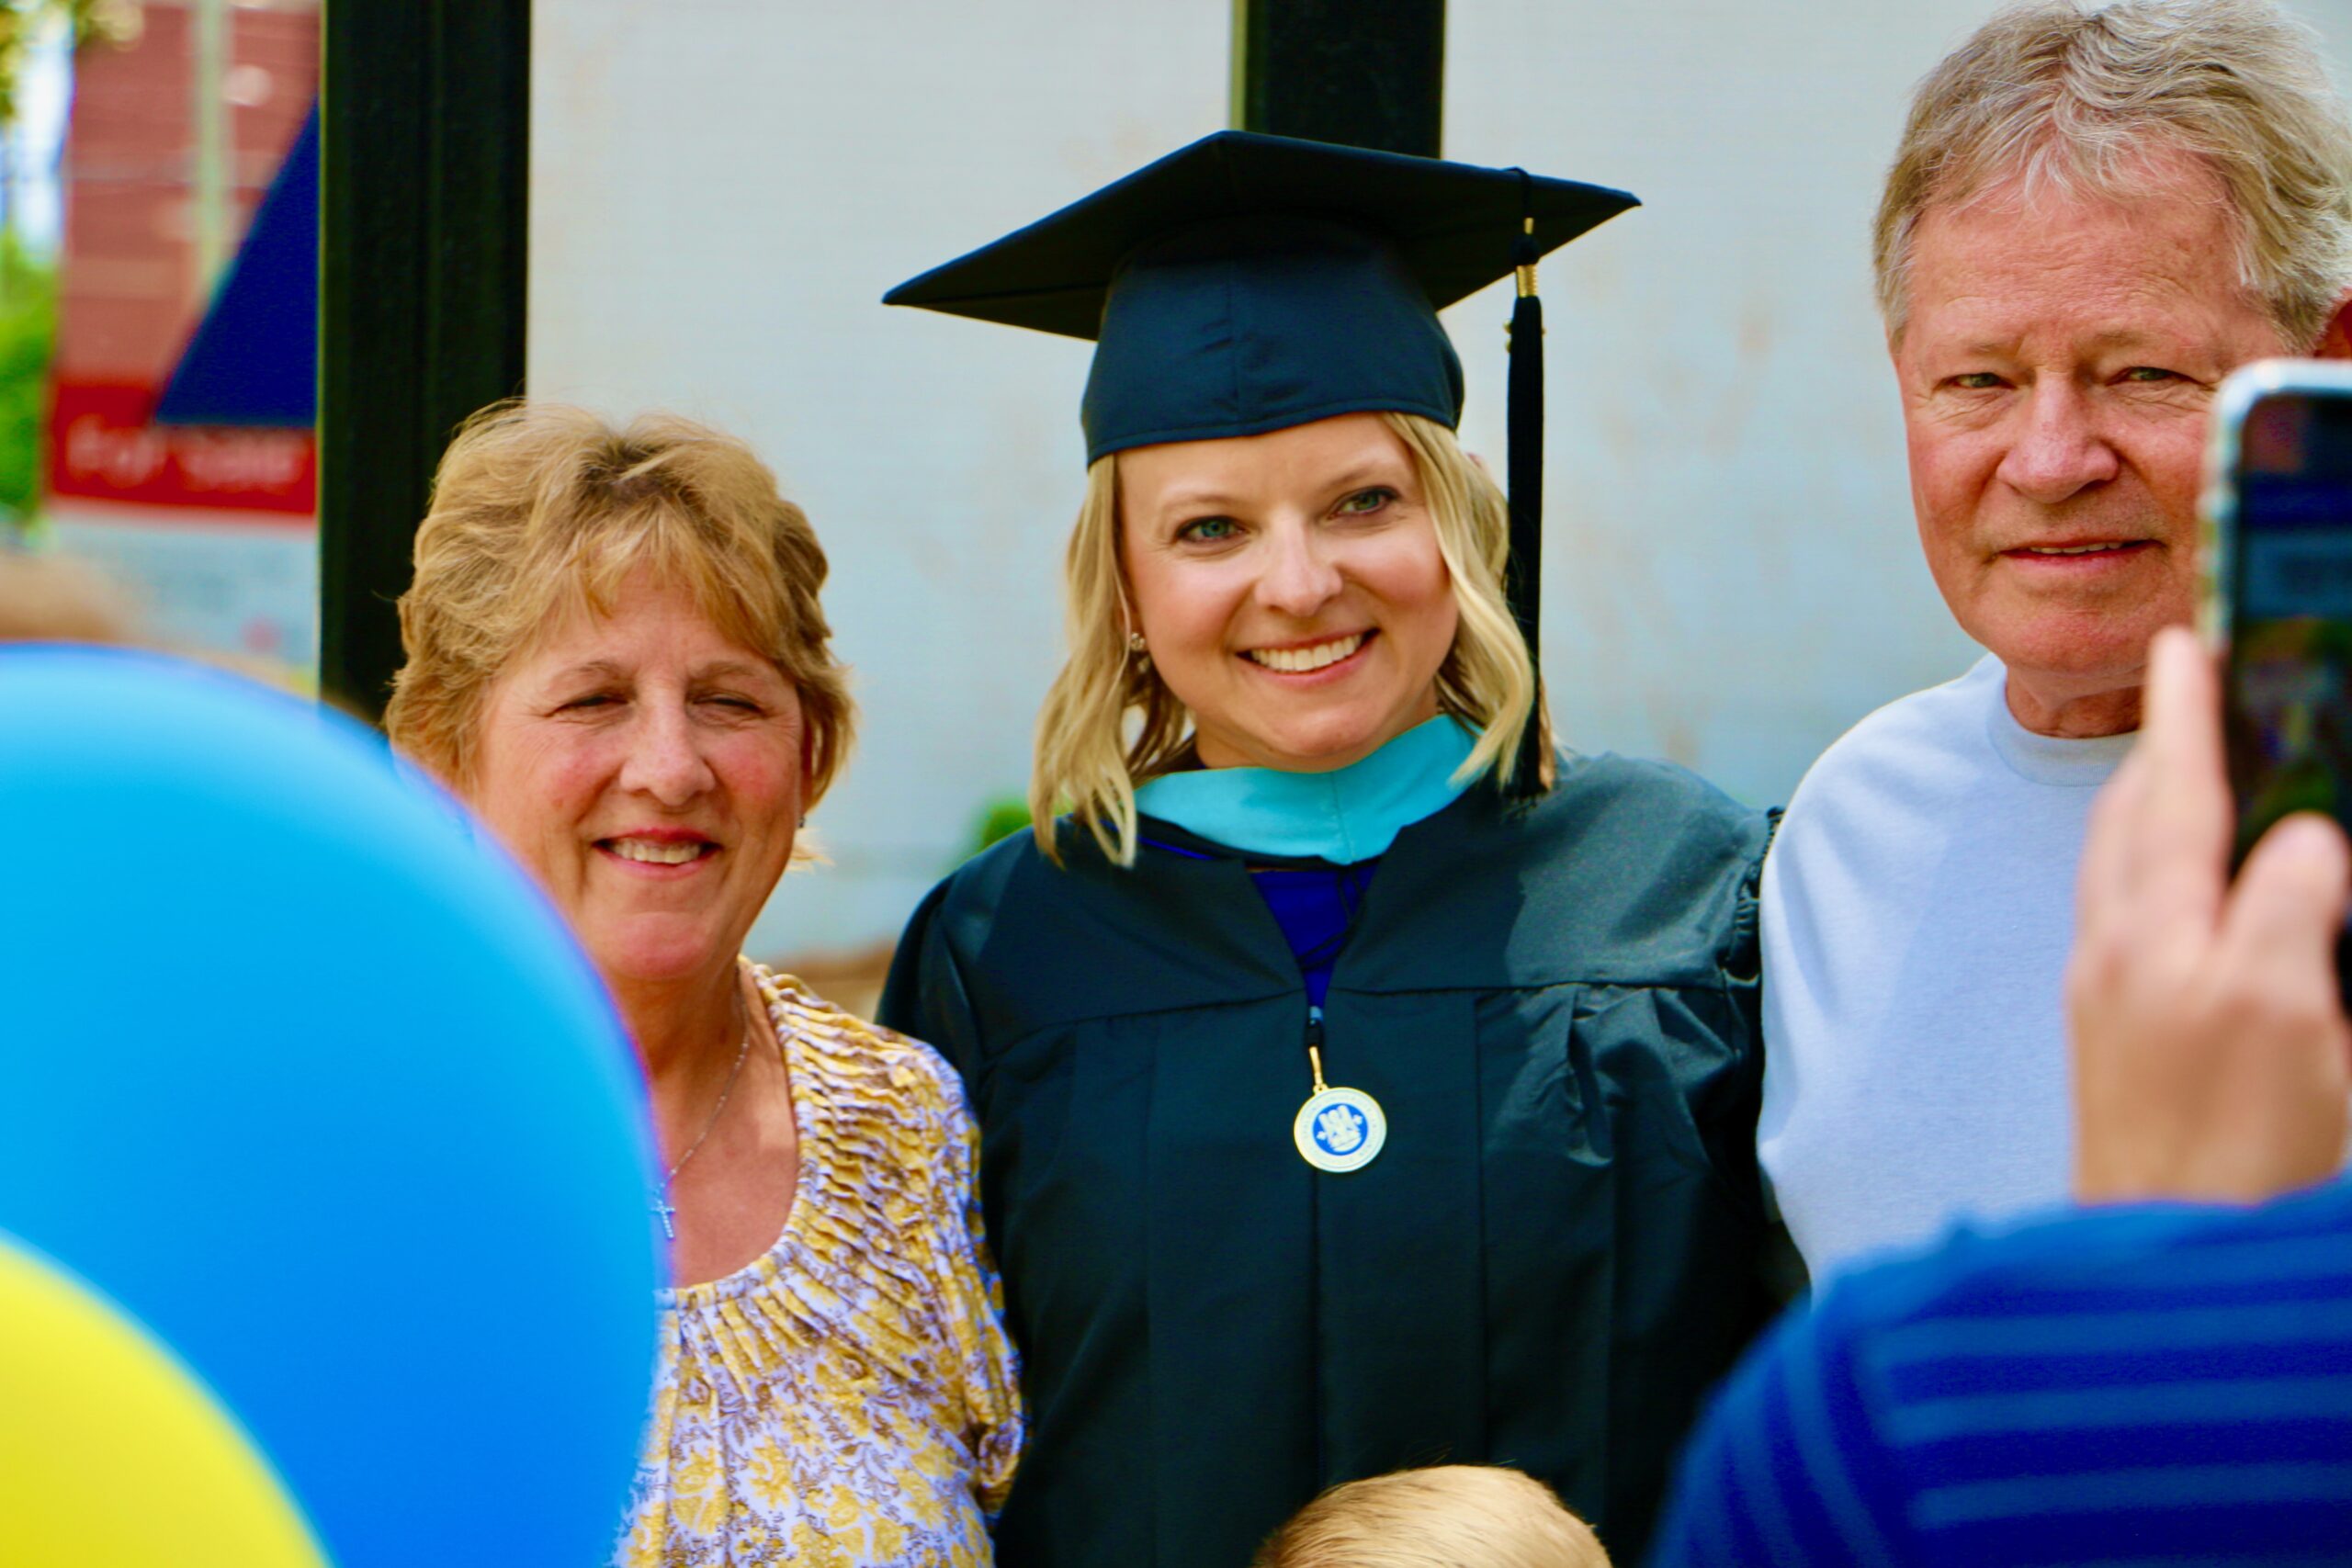 Spalding master's graduate posing with parents